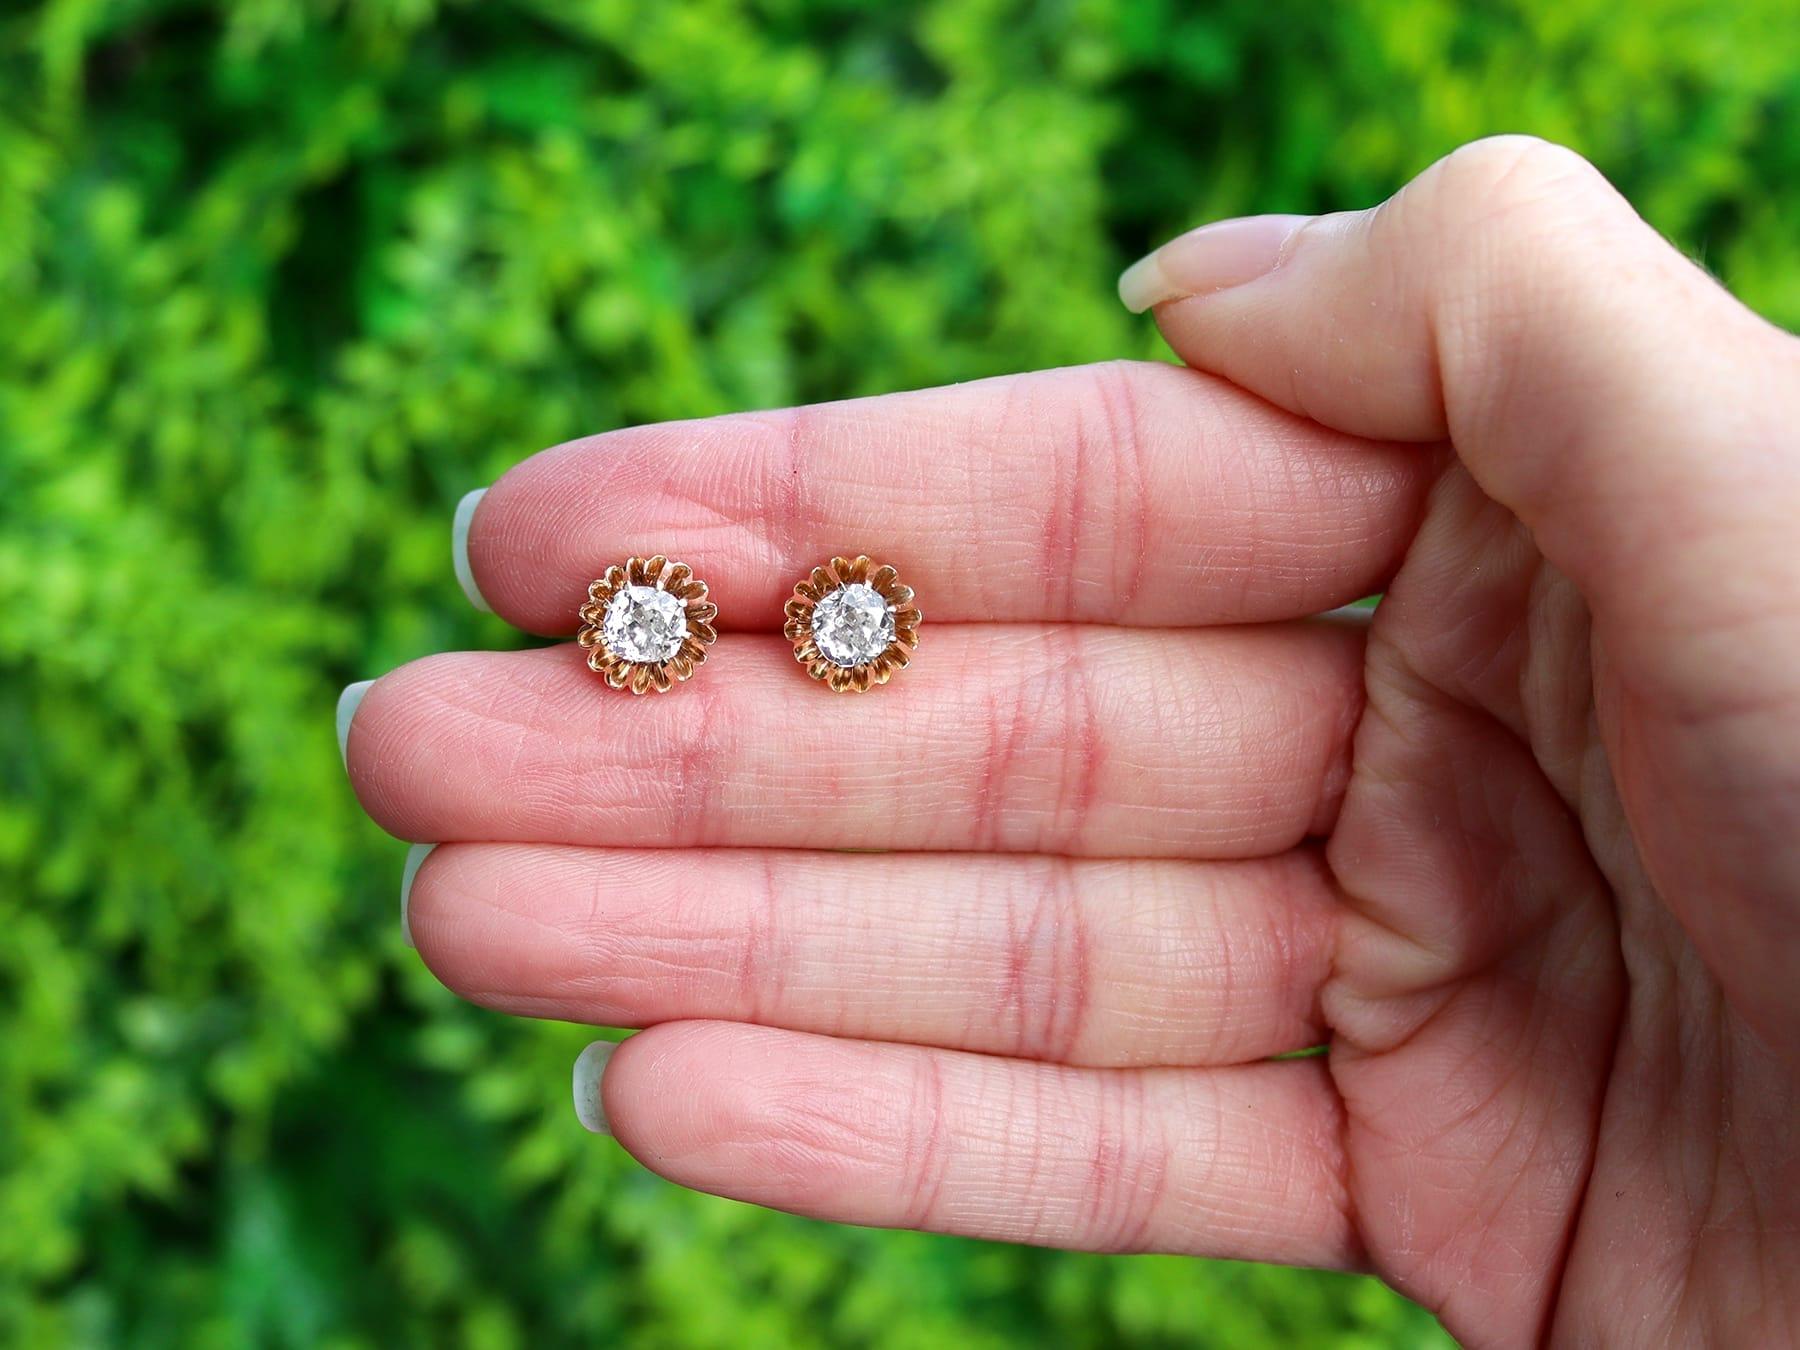 An impressive pair of antique 1.13 carat diamond and 14 karat yellow gold stud earrings; part of our diverse antique jewelry and estate jewelry collections.

These fine and impressive antique diamond earrings have been crafted in 14k yellow